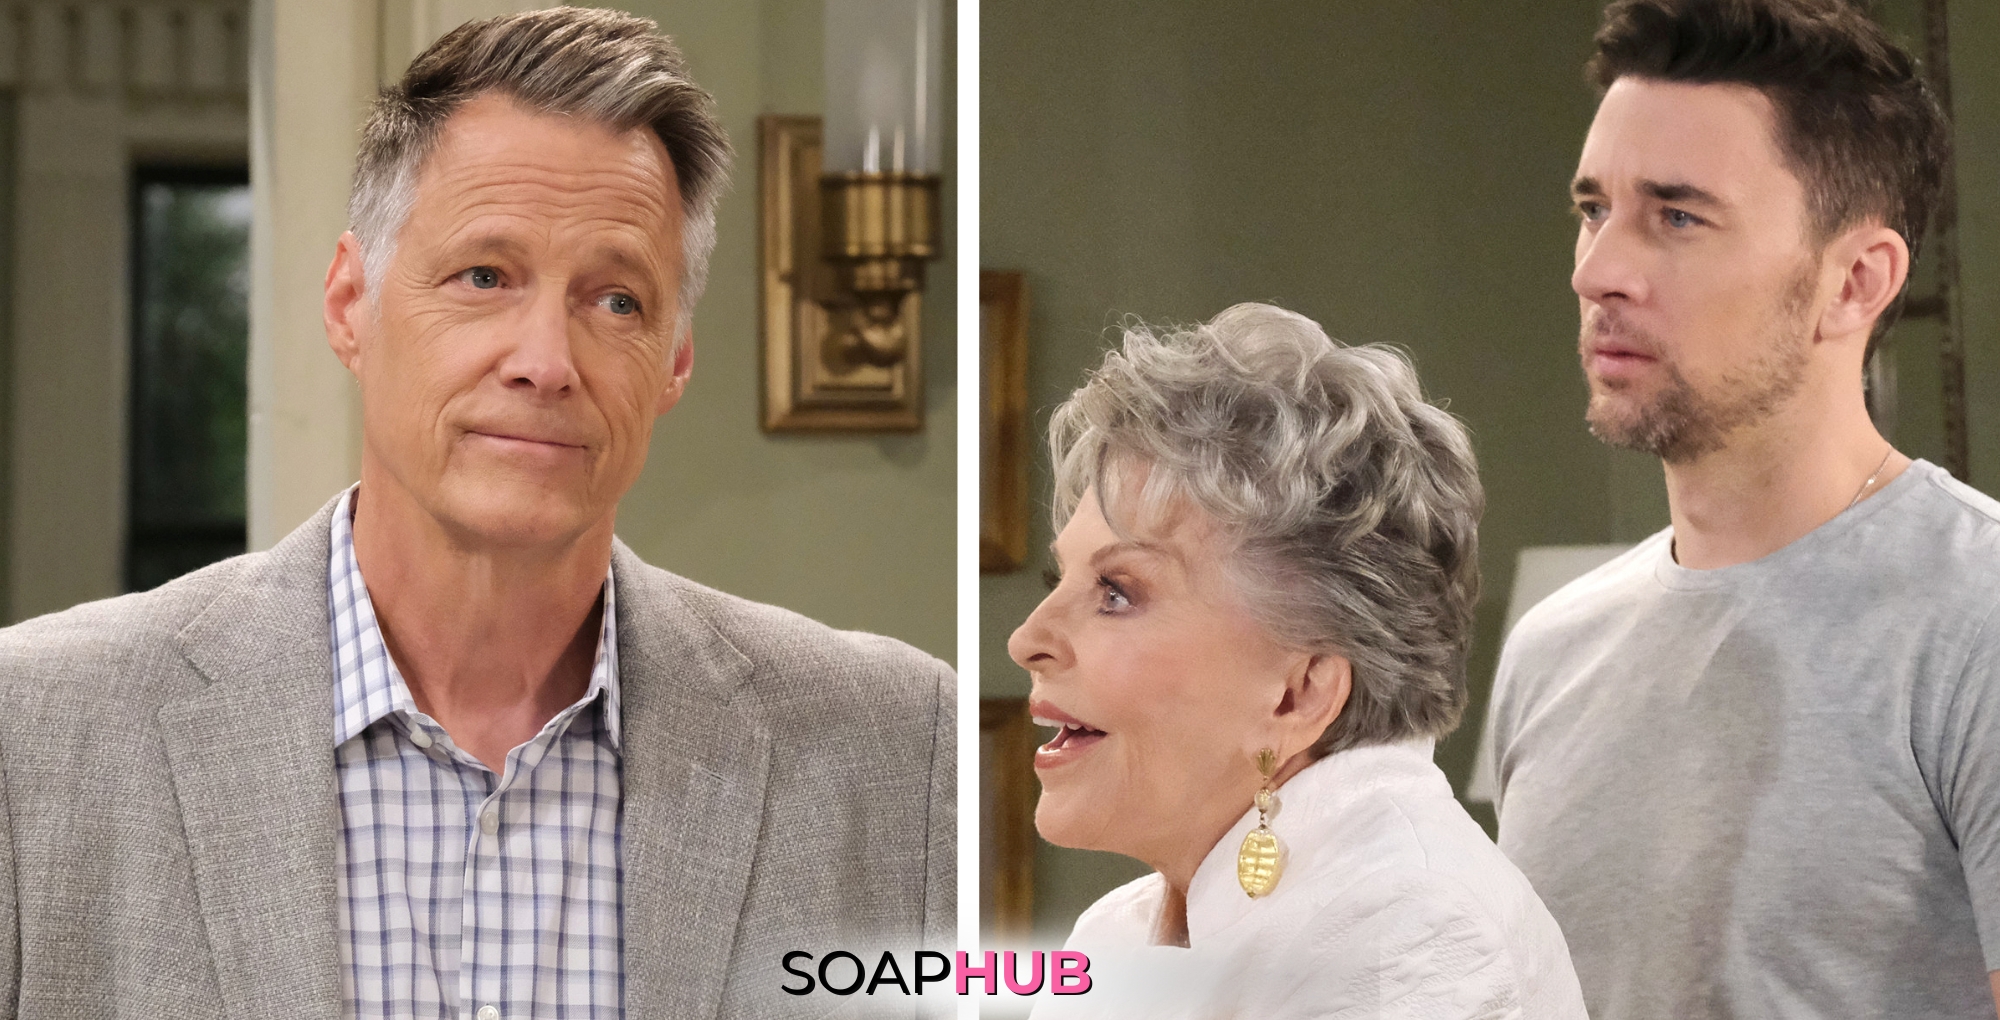 Days of our Lives spoilers feature Jack, Julie, and Chad with the Soap Hub logo.